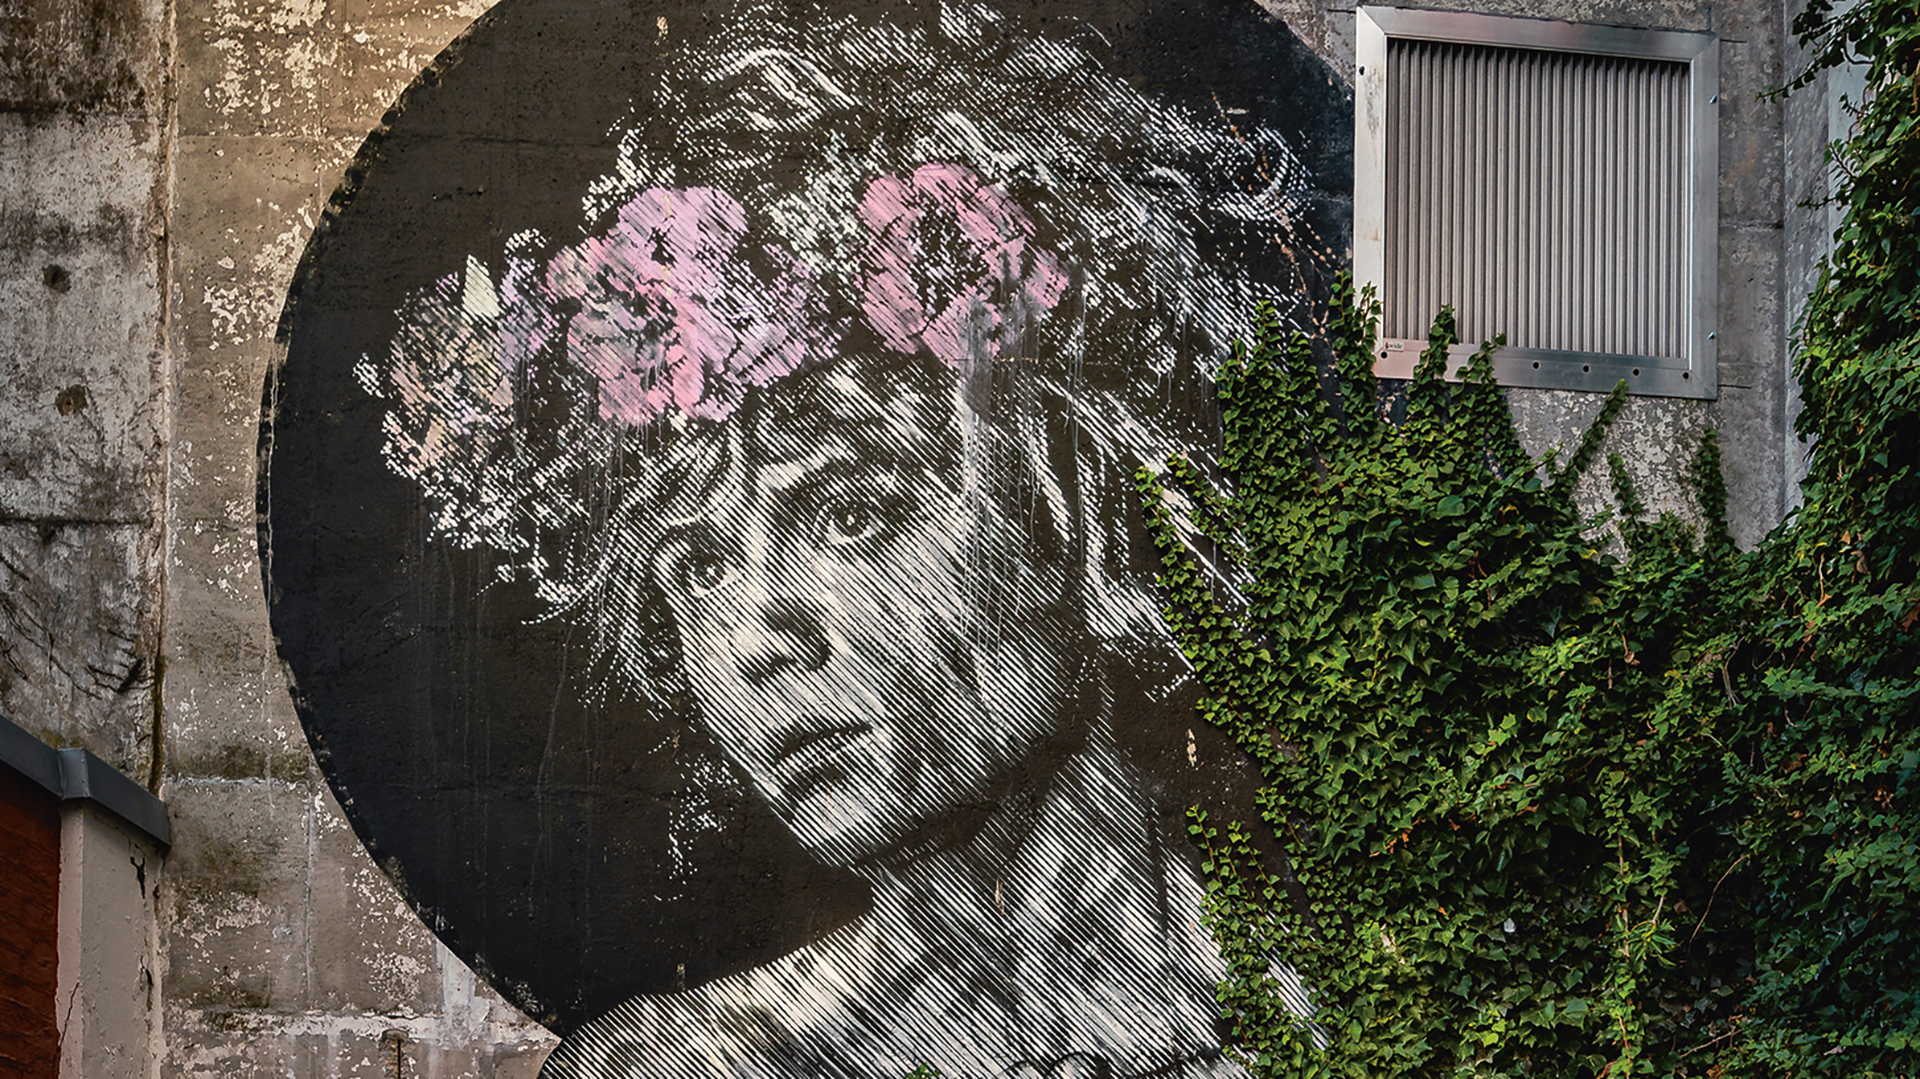 A painting of a girl with flowers for her hair by Artist duo Snik